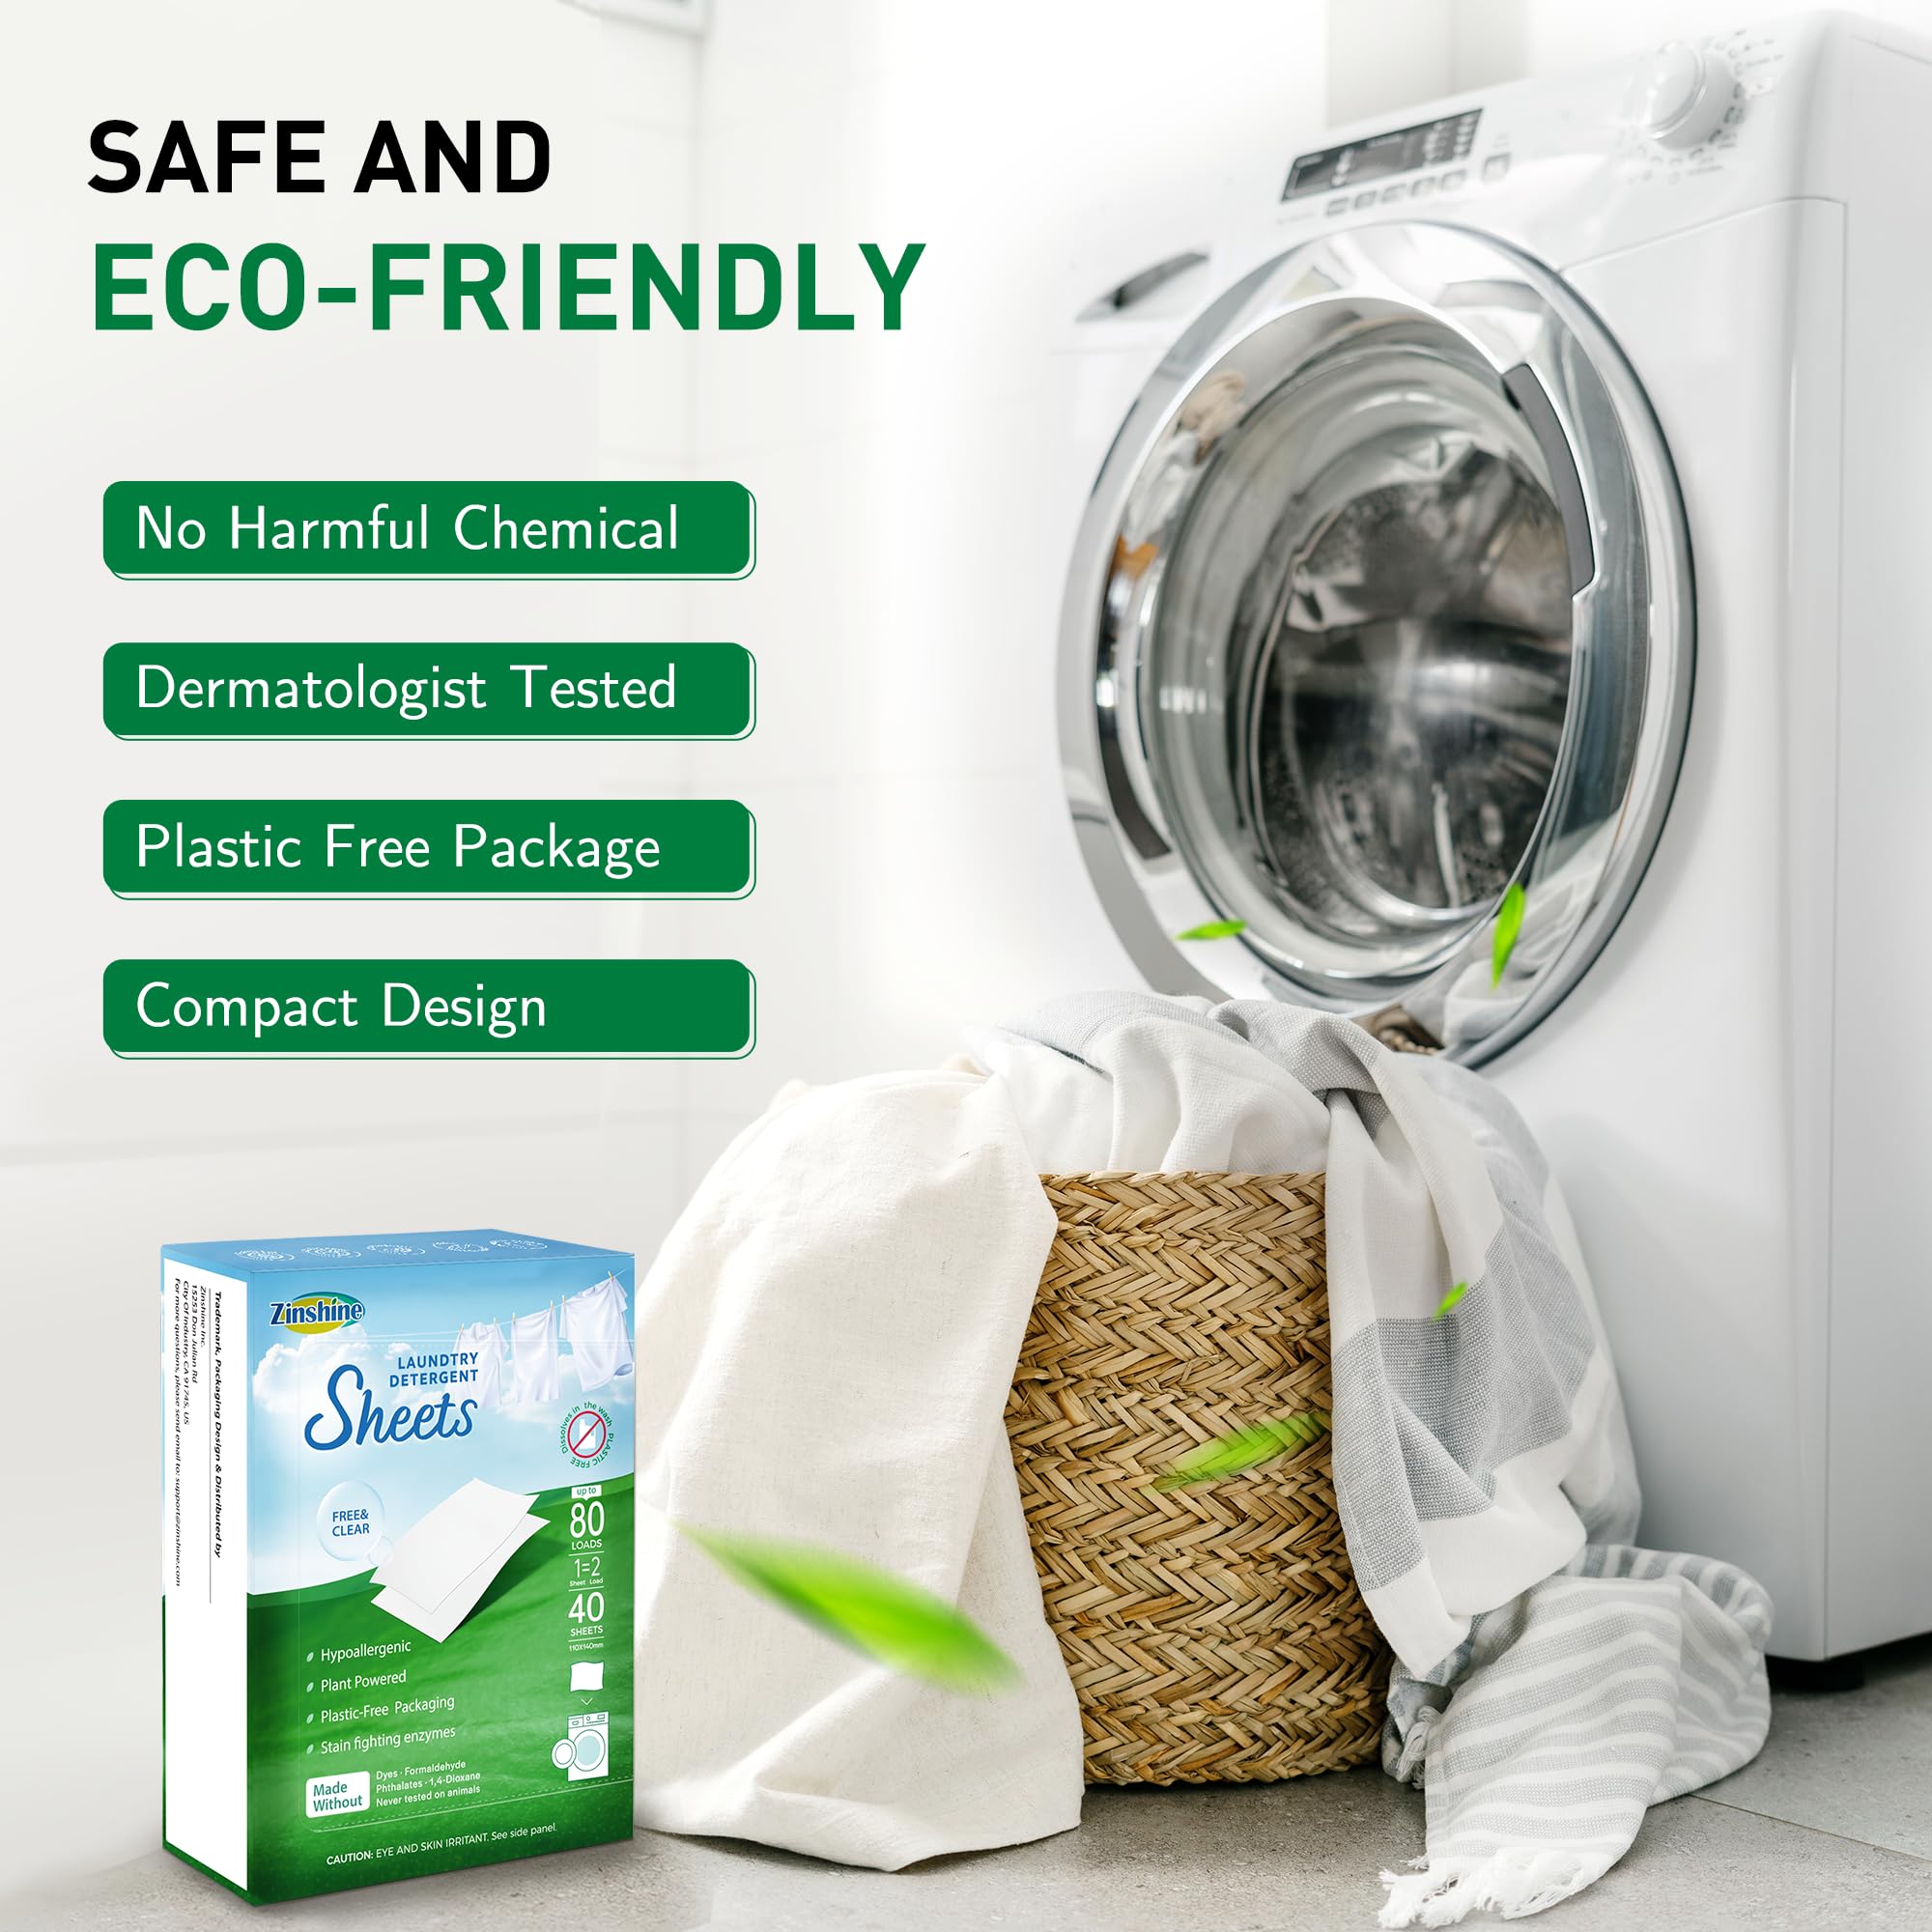 Laundry Detergent Sheets, Zinshine Laundry Soap Sheet, Eco Friendly Hypoallergenic Washer Detergent Sheets, Free & Clear Scent, Great for Hotels, Dorm, Travel, Camping, Laundry Room, up to 80 loads